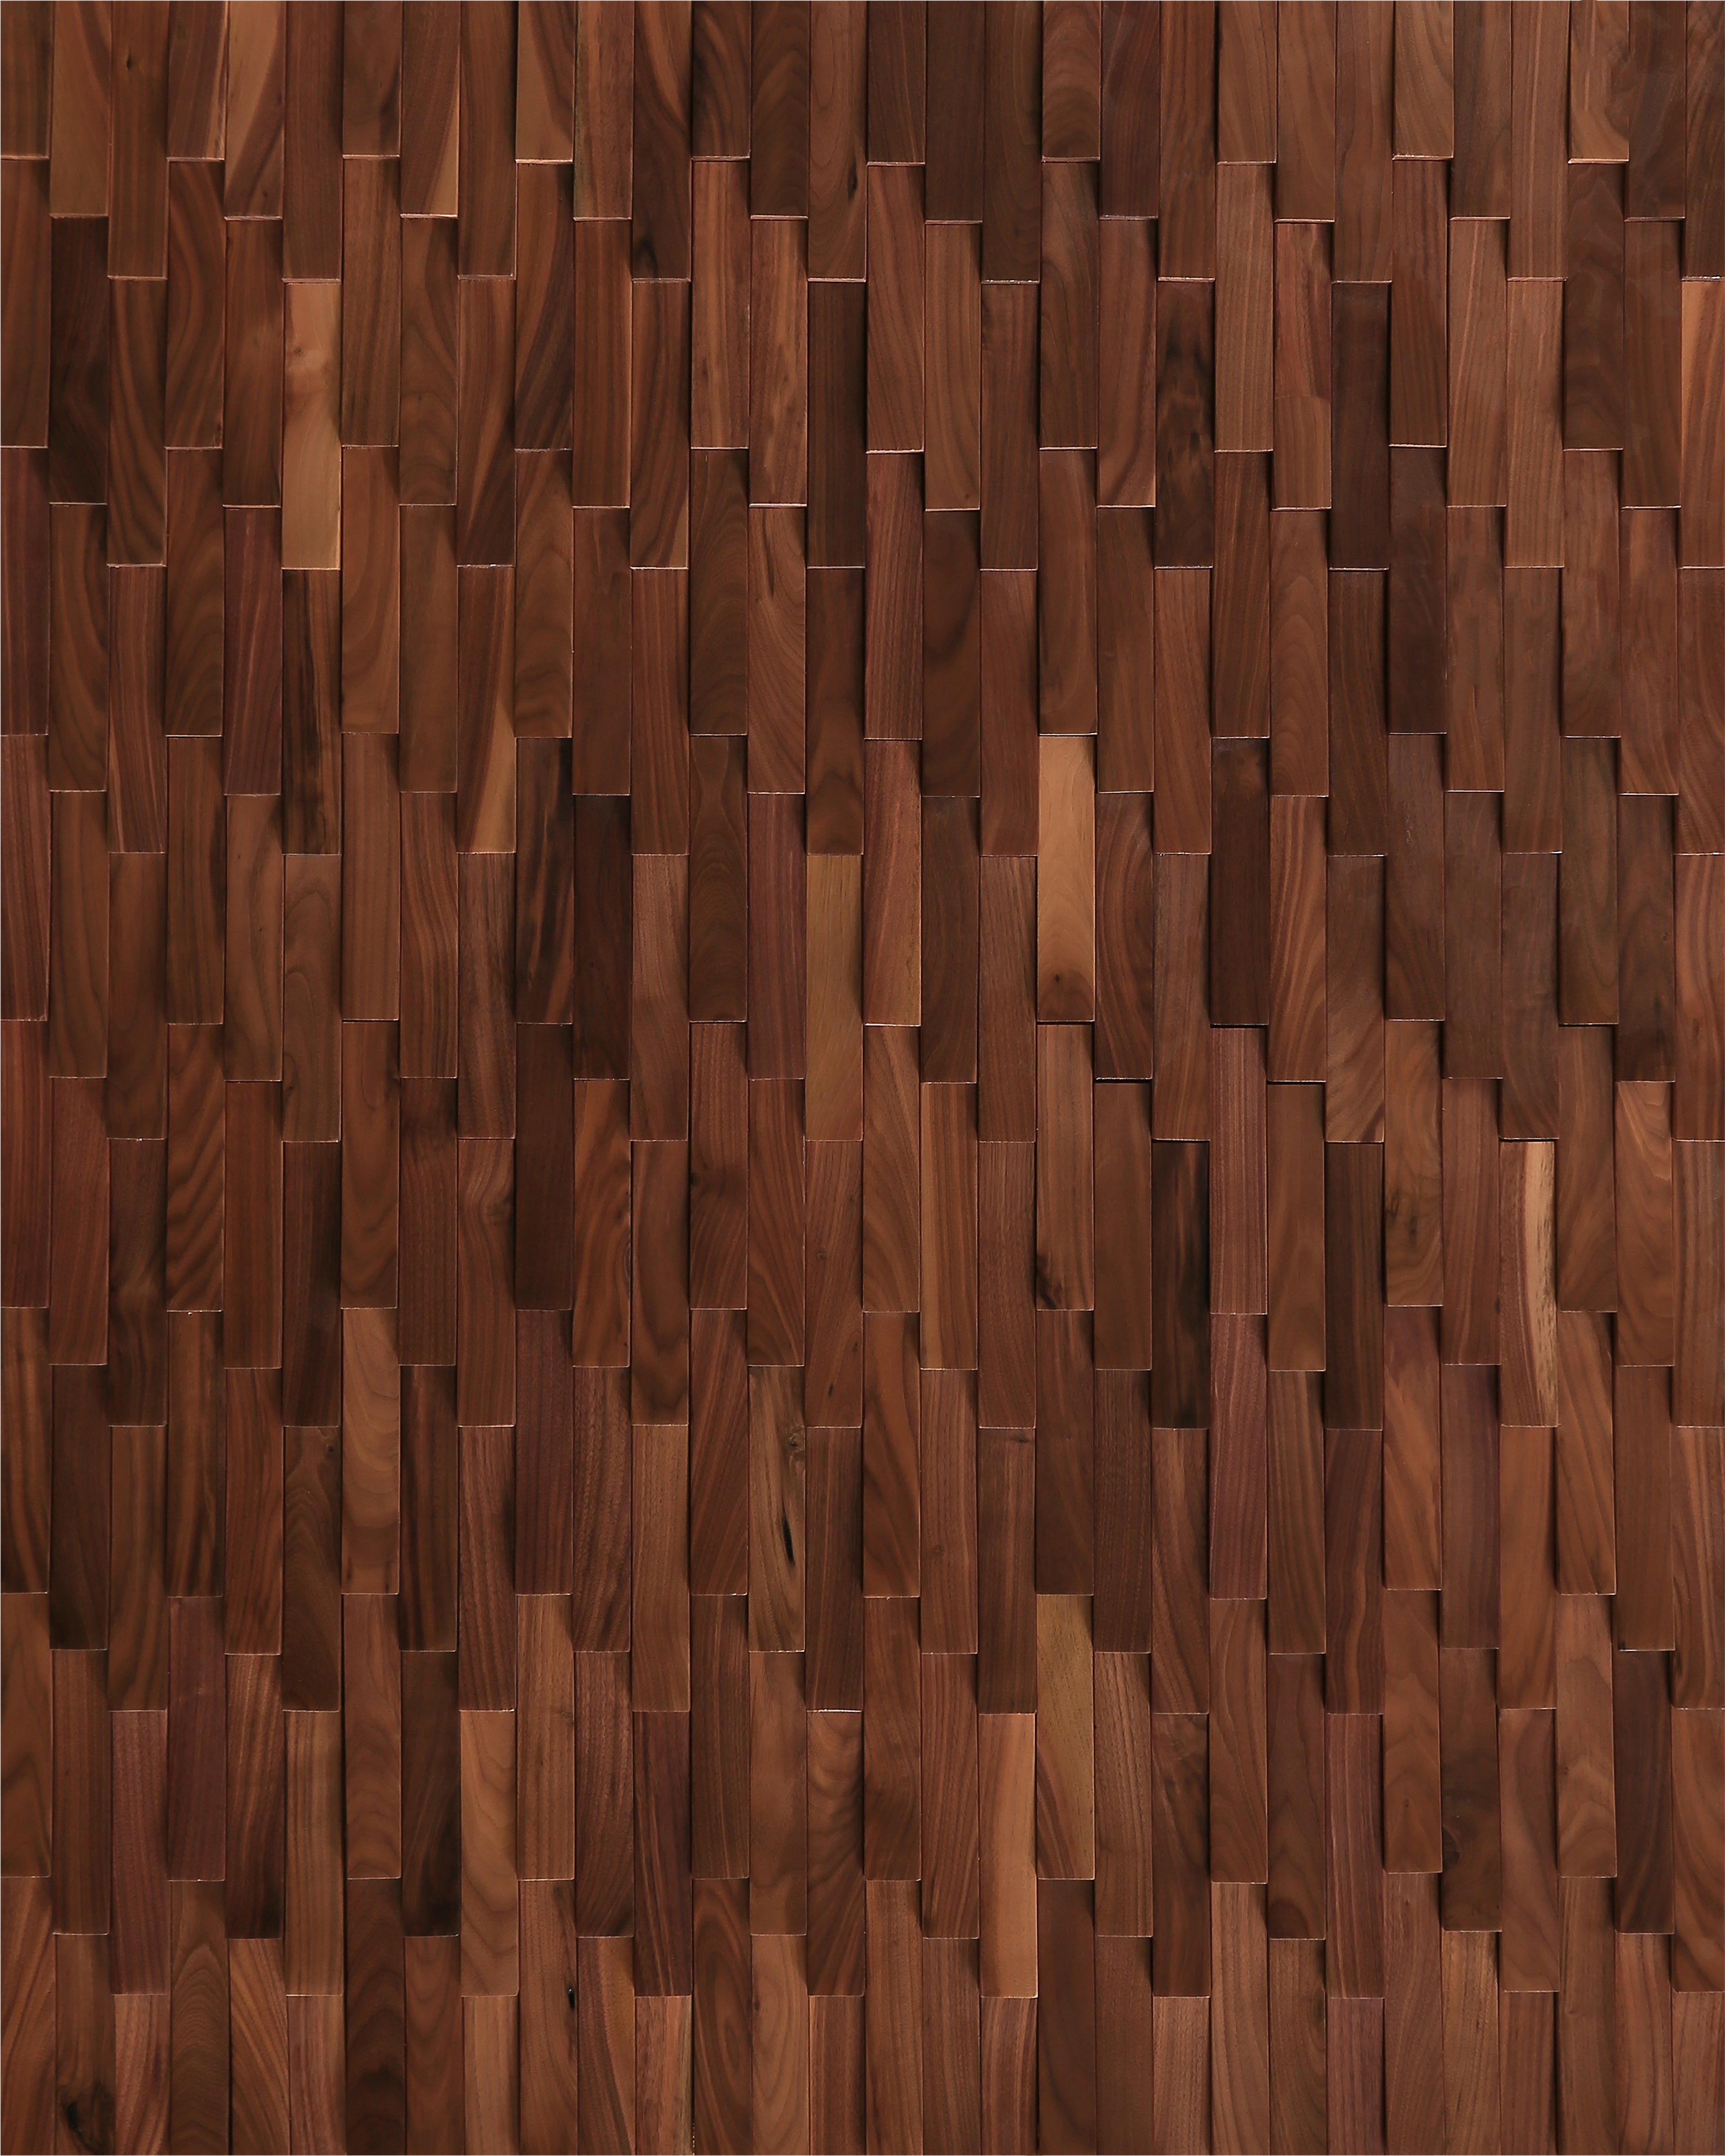 duchateau inceptiv wave american walnut three dimensional wall natural wood panel conversion varnish for interior use distributed by surface group international